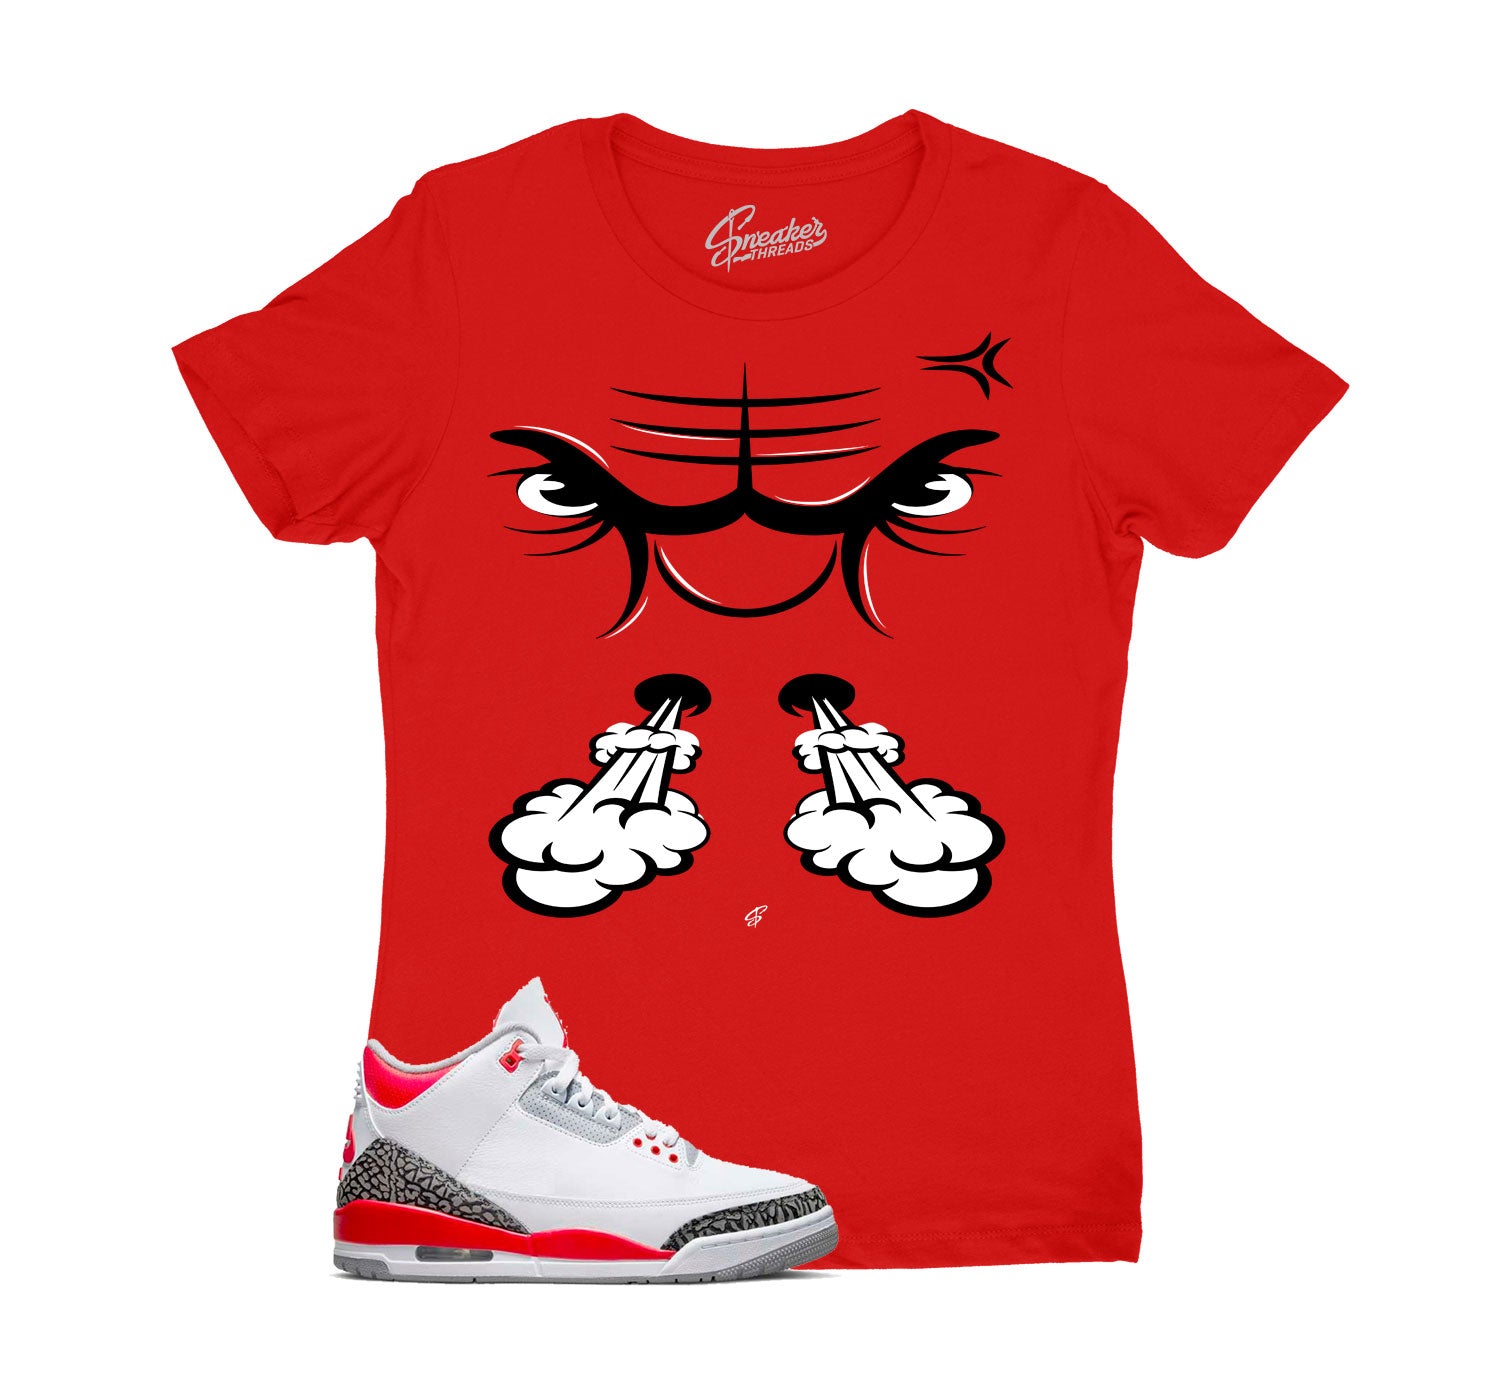 Womens Fire Red 3 Shirt - Raging Face - Red